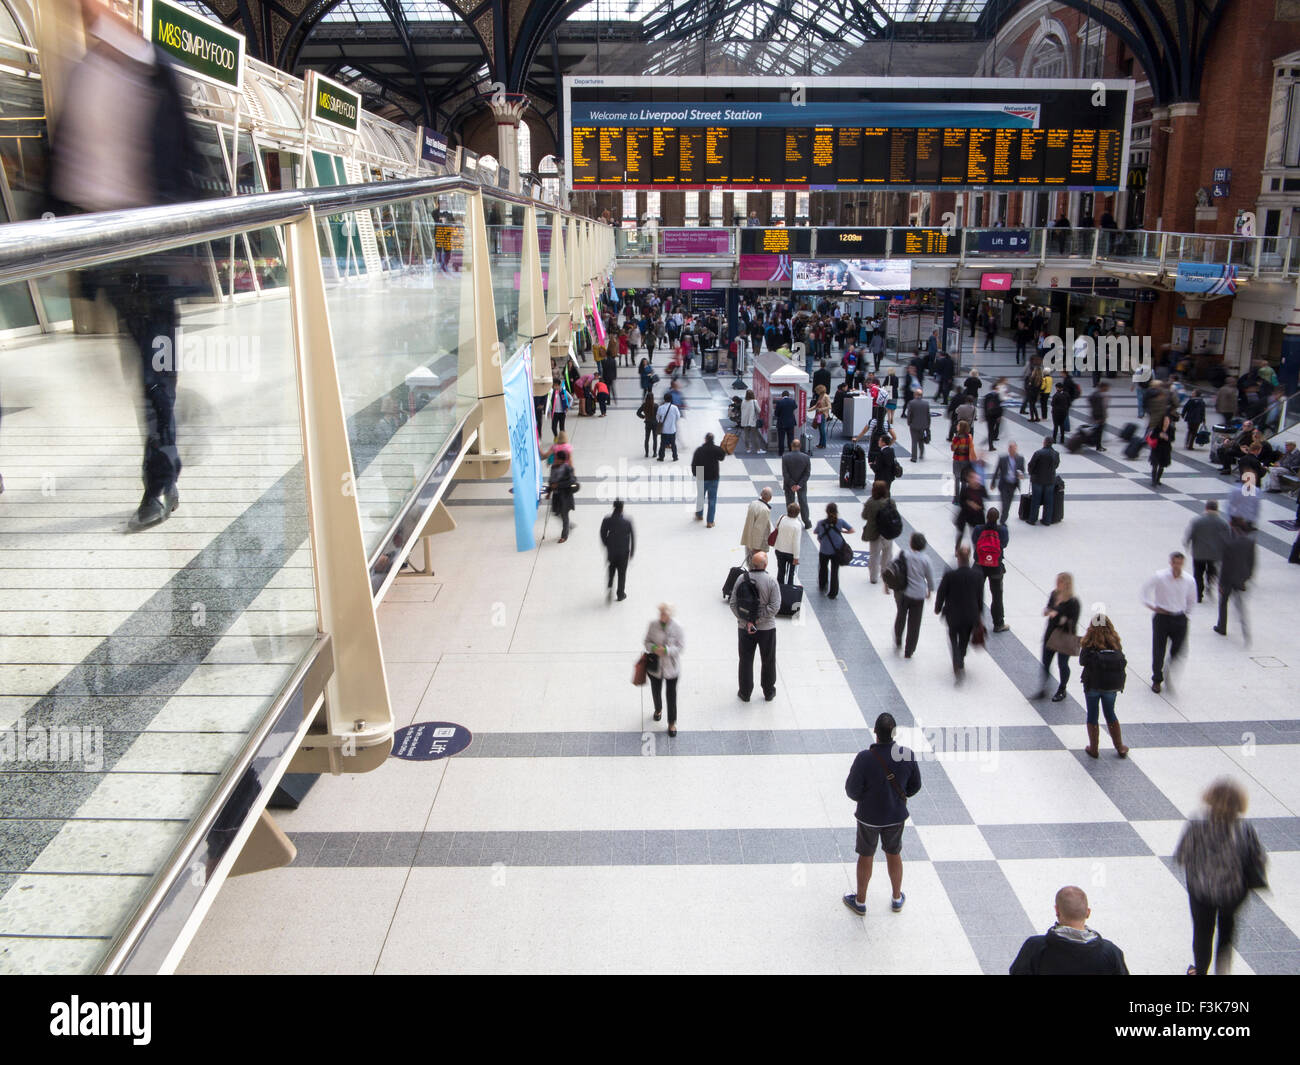 Liverpool street station in london rush hour Stock Photo